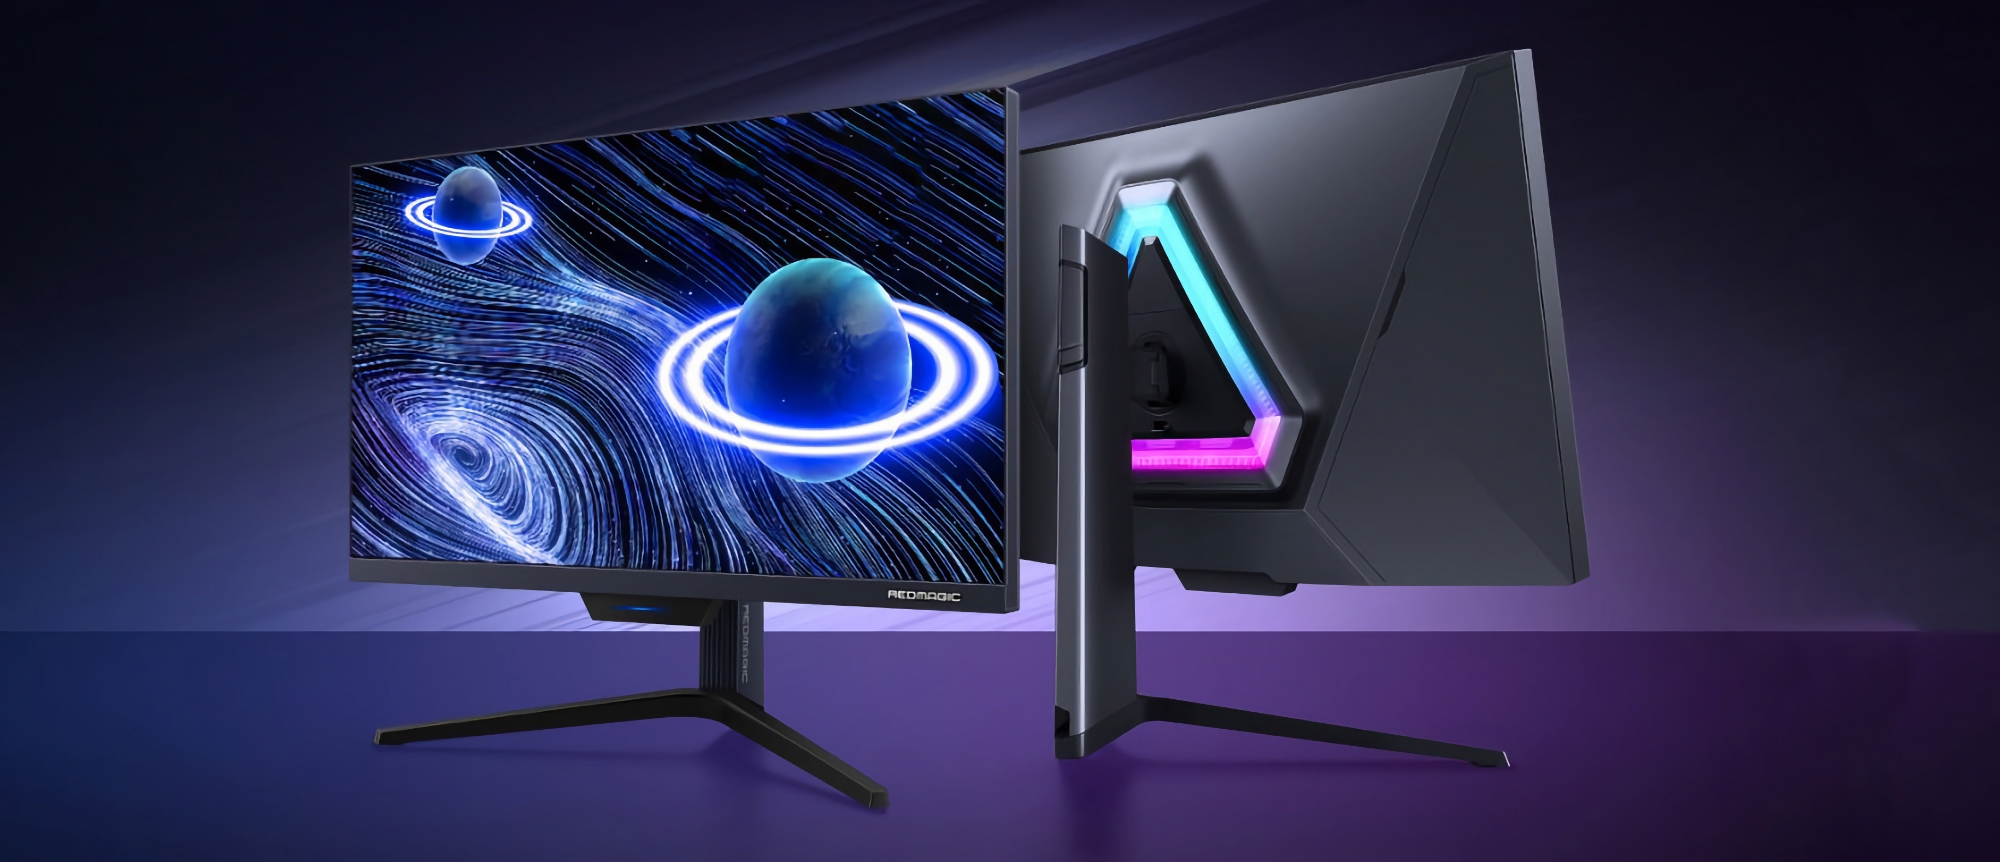 Nubia Red Magic Gaming Monitor with 27" 4K mini LED screen and 160Hz support debuted globally